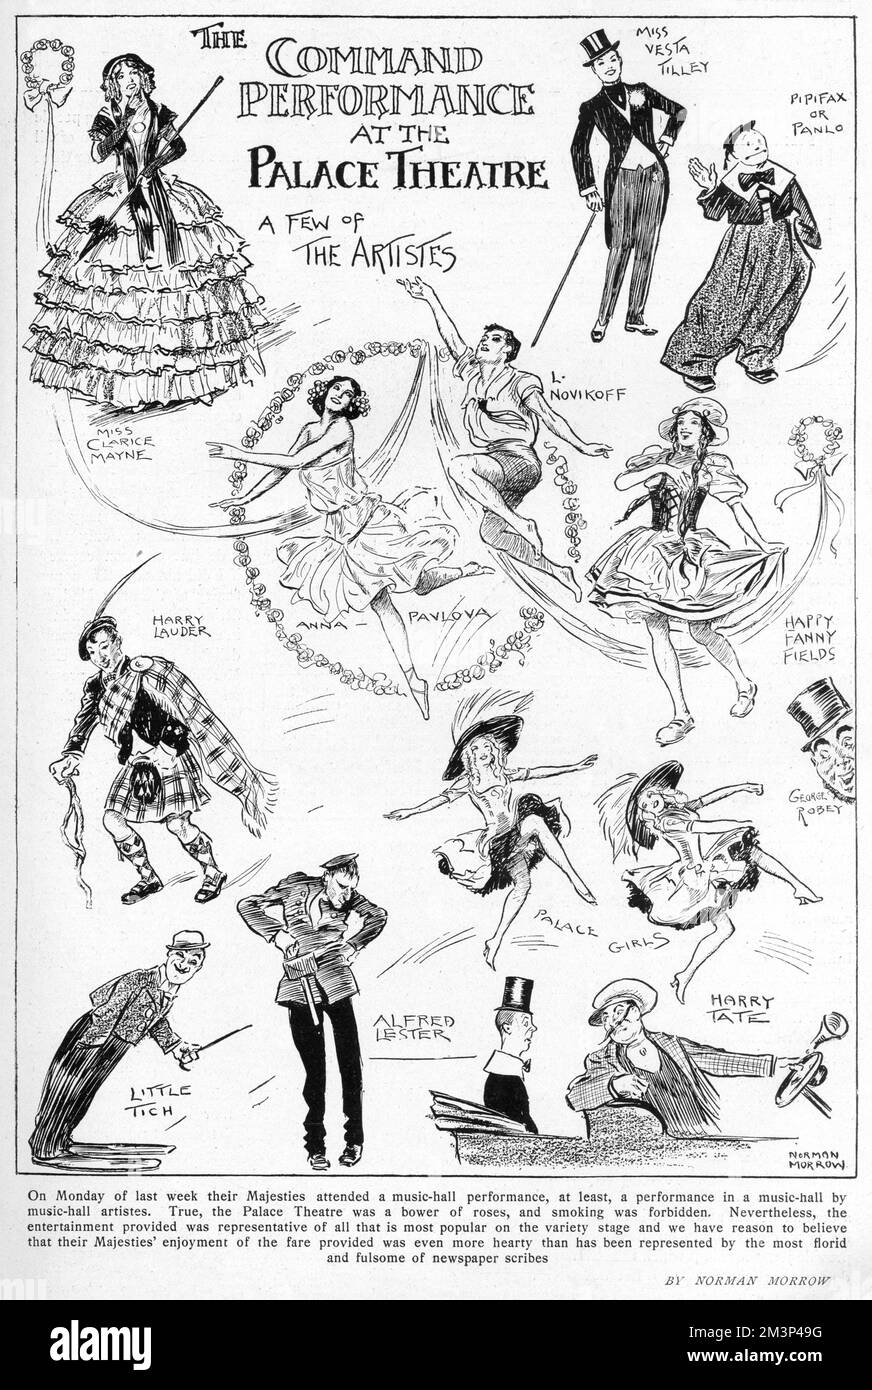 A page of sketches by artist Norman Morrow, recording the acts on the bill at the first Royal Command Performance of in the Art of Variety (later known as the Royal Variety Performance) at the Palace Theatre, London on 1 July 1912 in the presence of King George V, Queen Mary and assorted other members of the royal family.  Among the acts pictured are Miss Clarice Mayne, male impersonator, Vesta Tilley, Pipifax or Panlo, Happy Fanny Fields, George Robey, Harry Tate, Alfred Lester, Little Tich, Harry Lauder, the Palace Girls and the ballet dancers, Novikoff and Anna Pavlova.  Morrow, who produce Stock Photo